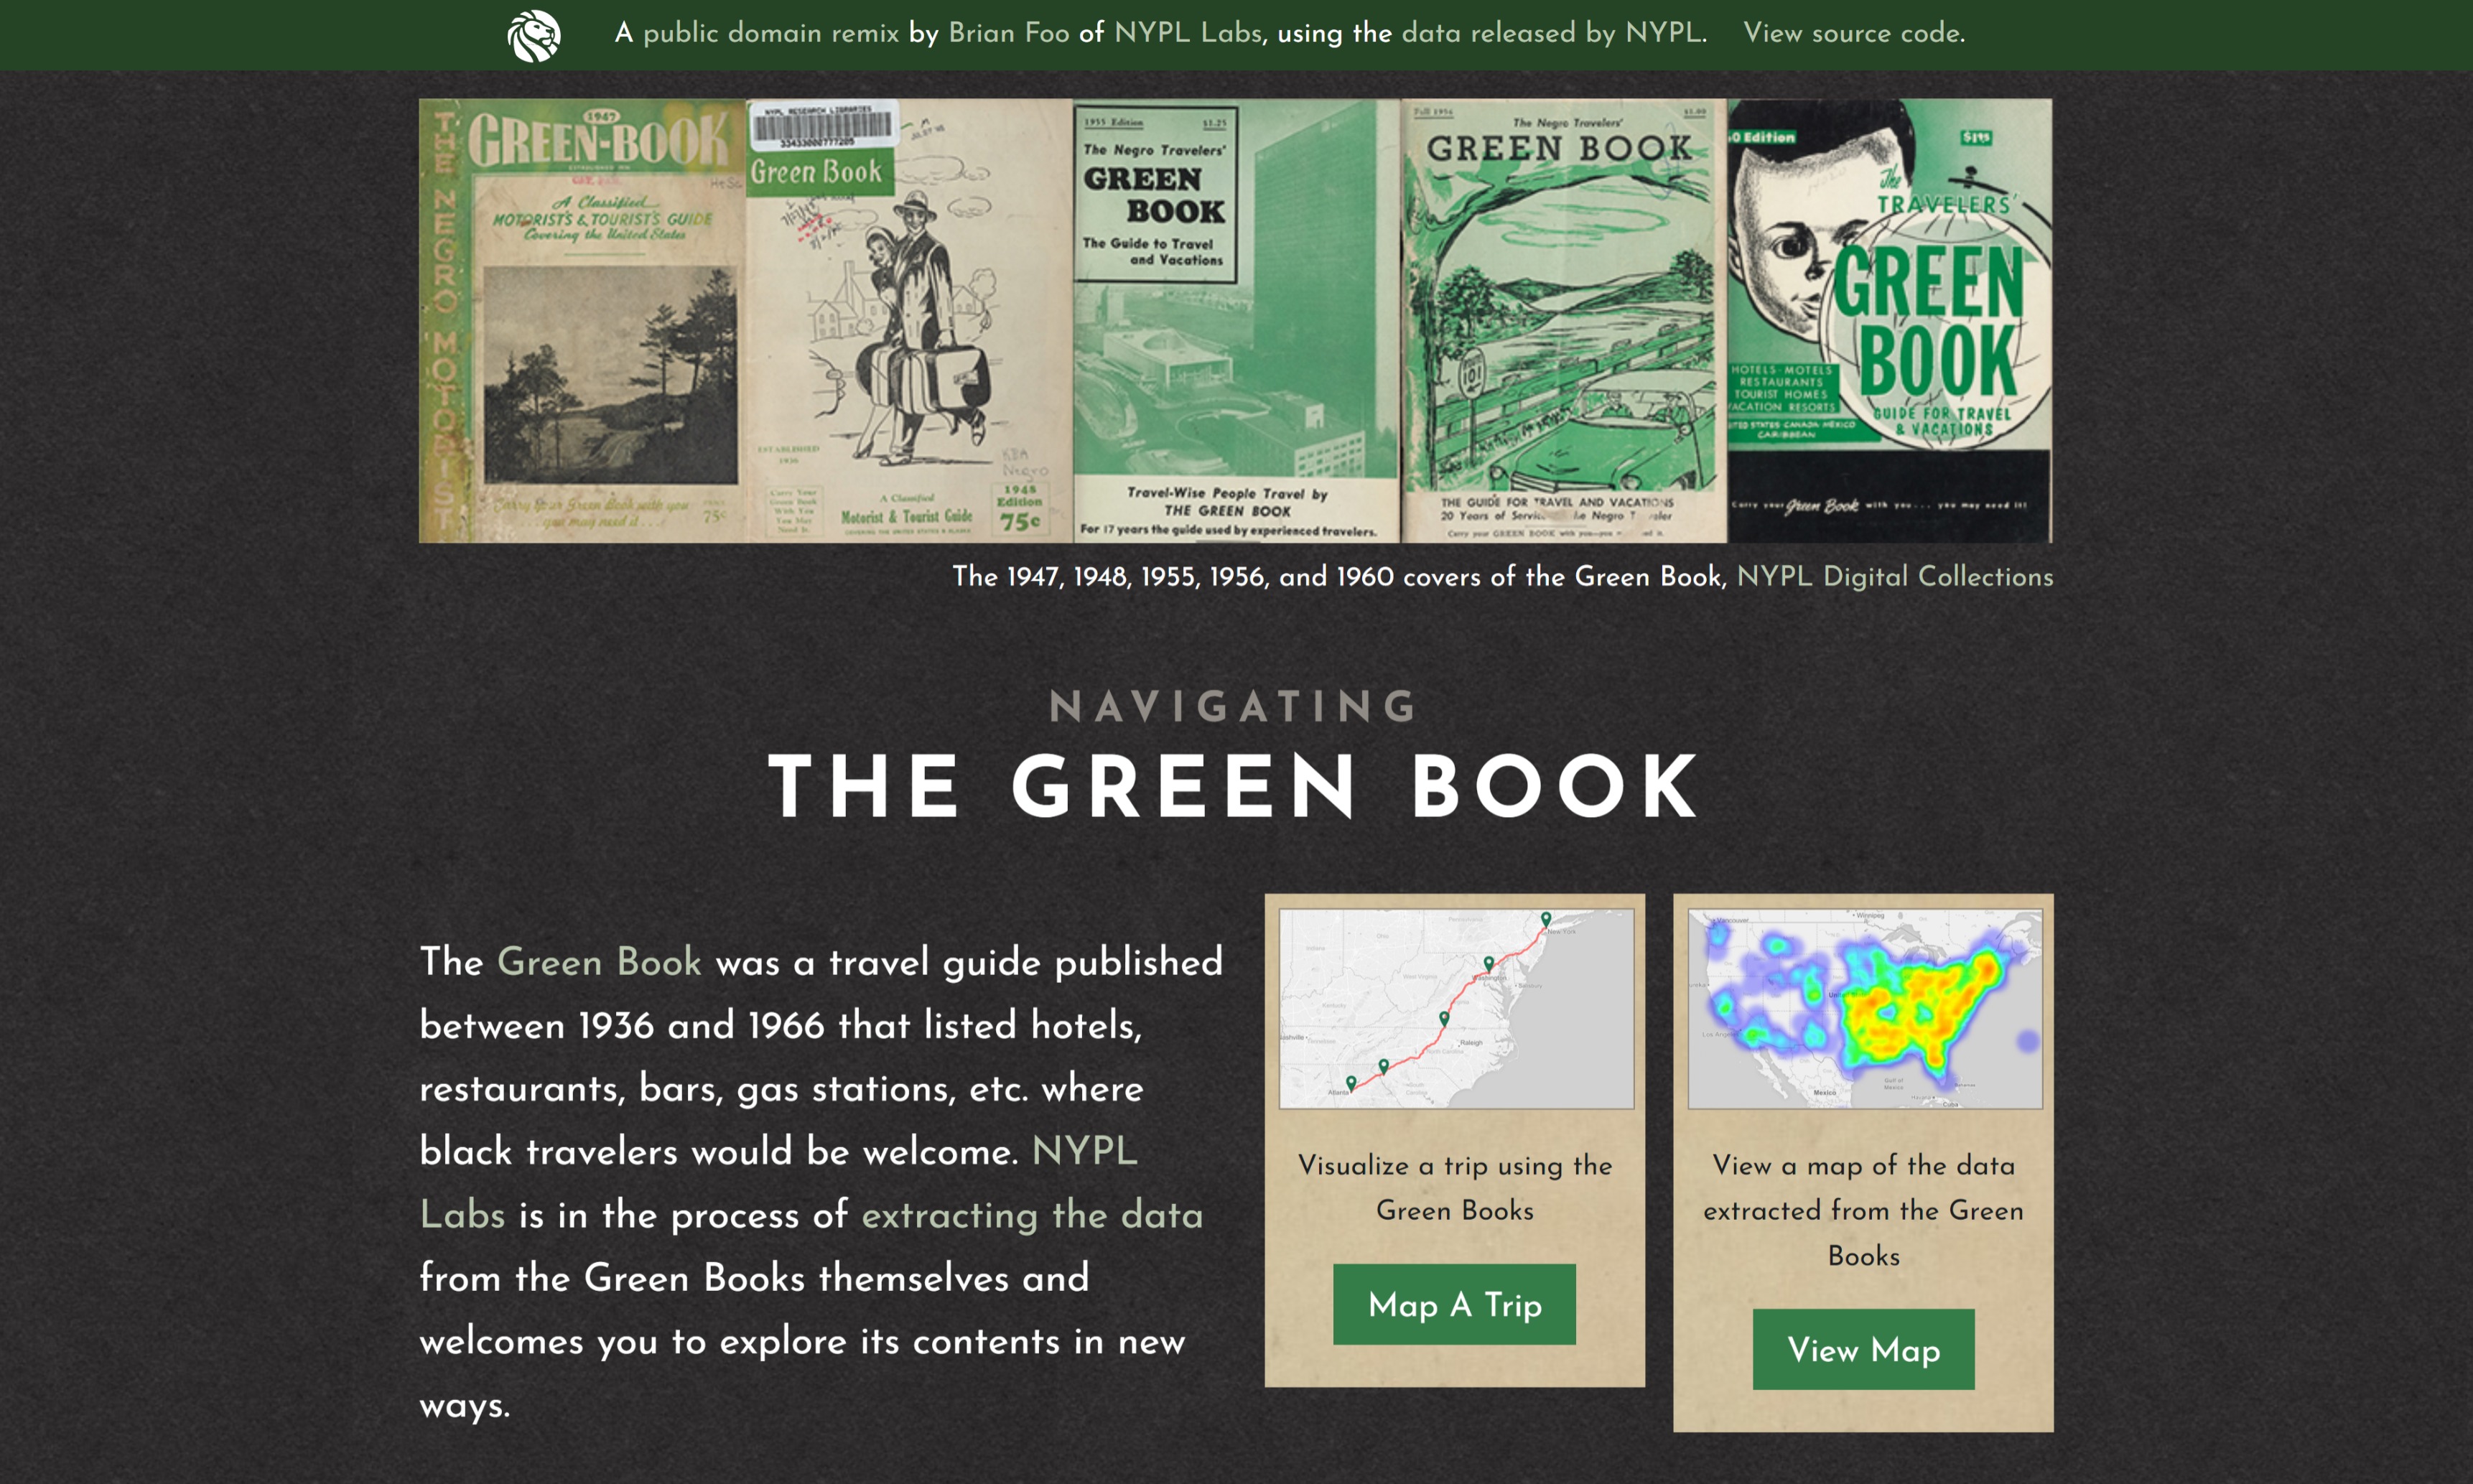 Navigating the Green Book "About This Project" page